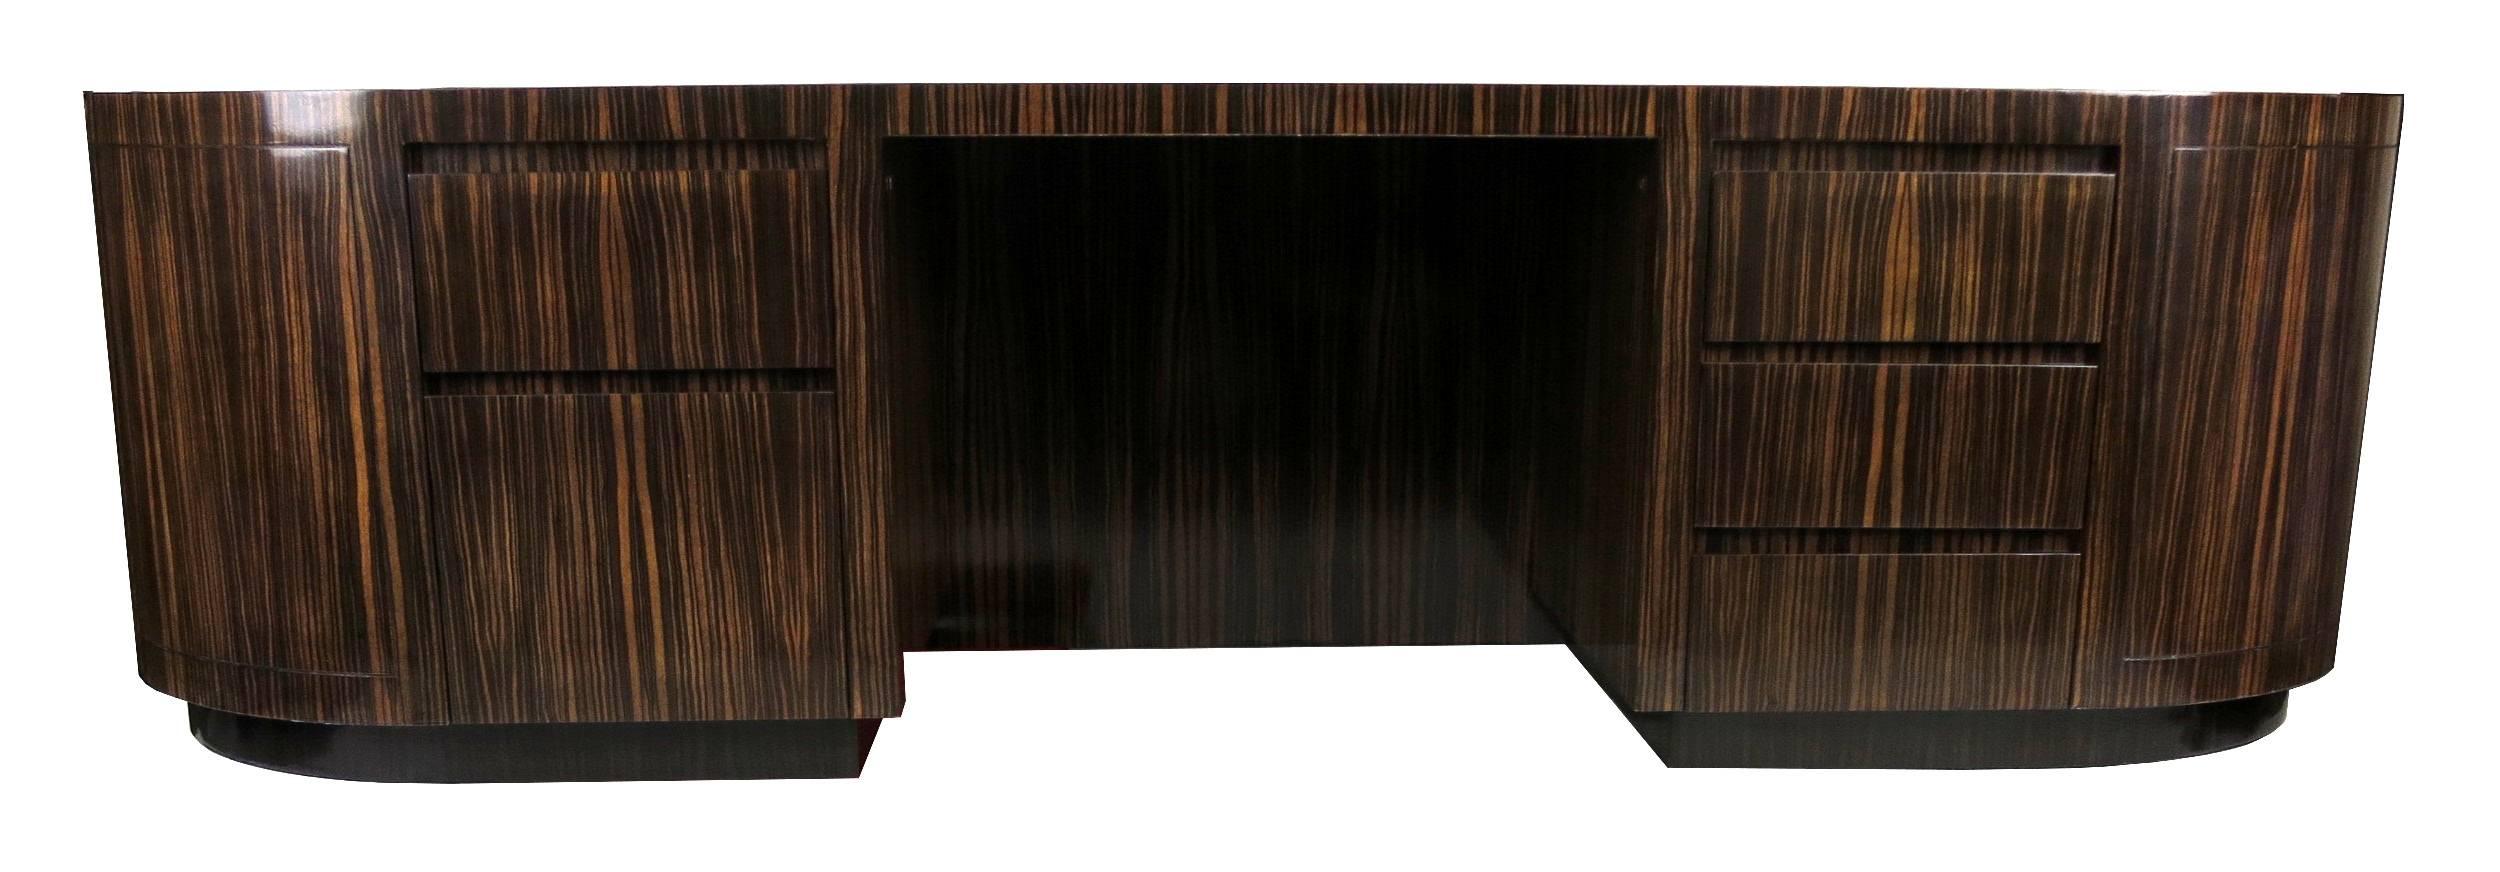 Spectacular and large-scale Custom Executive Desk in Macassar ebony, raised on a rosewood plinth base by Leon Rosen for Pace. The desk has five drawers and a three-piece inset leather top. The desk has been meticulously restored and refinished in